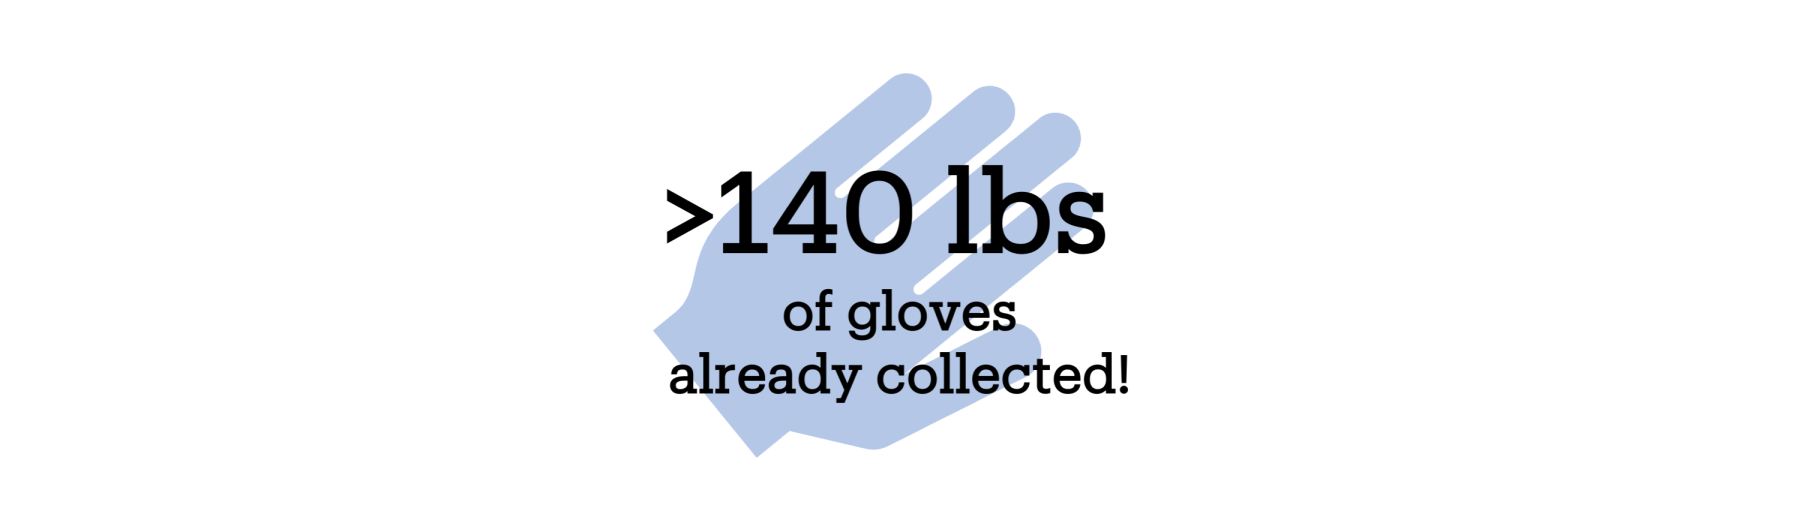 143lbs of gloves already collected